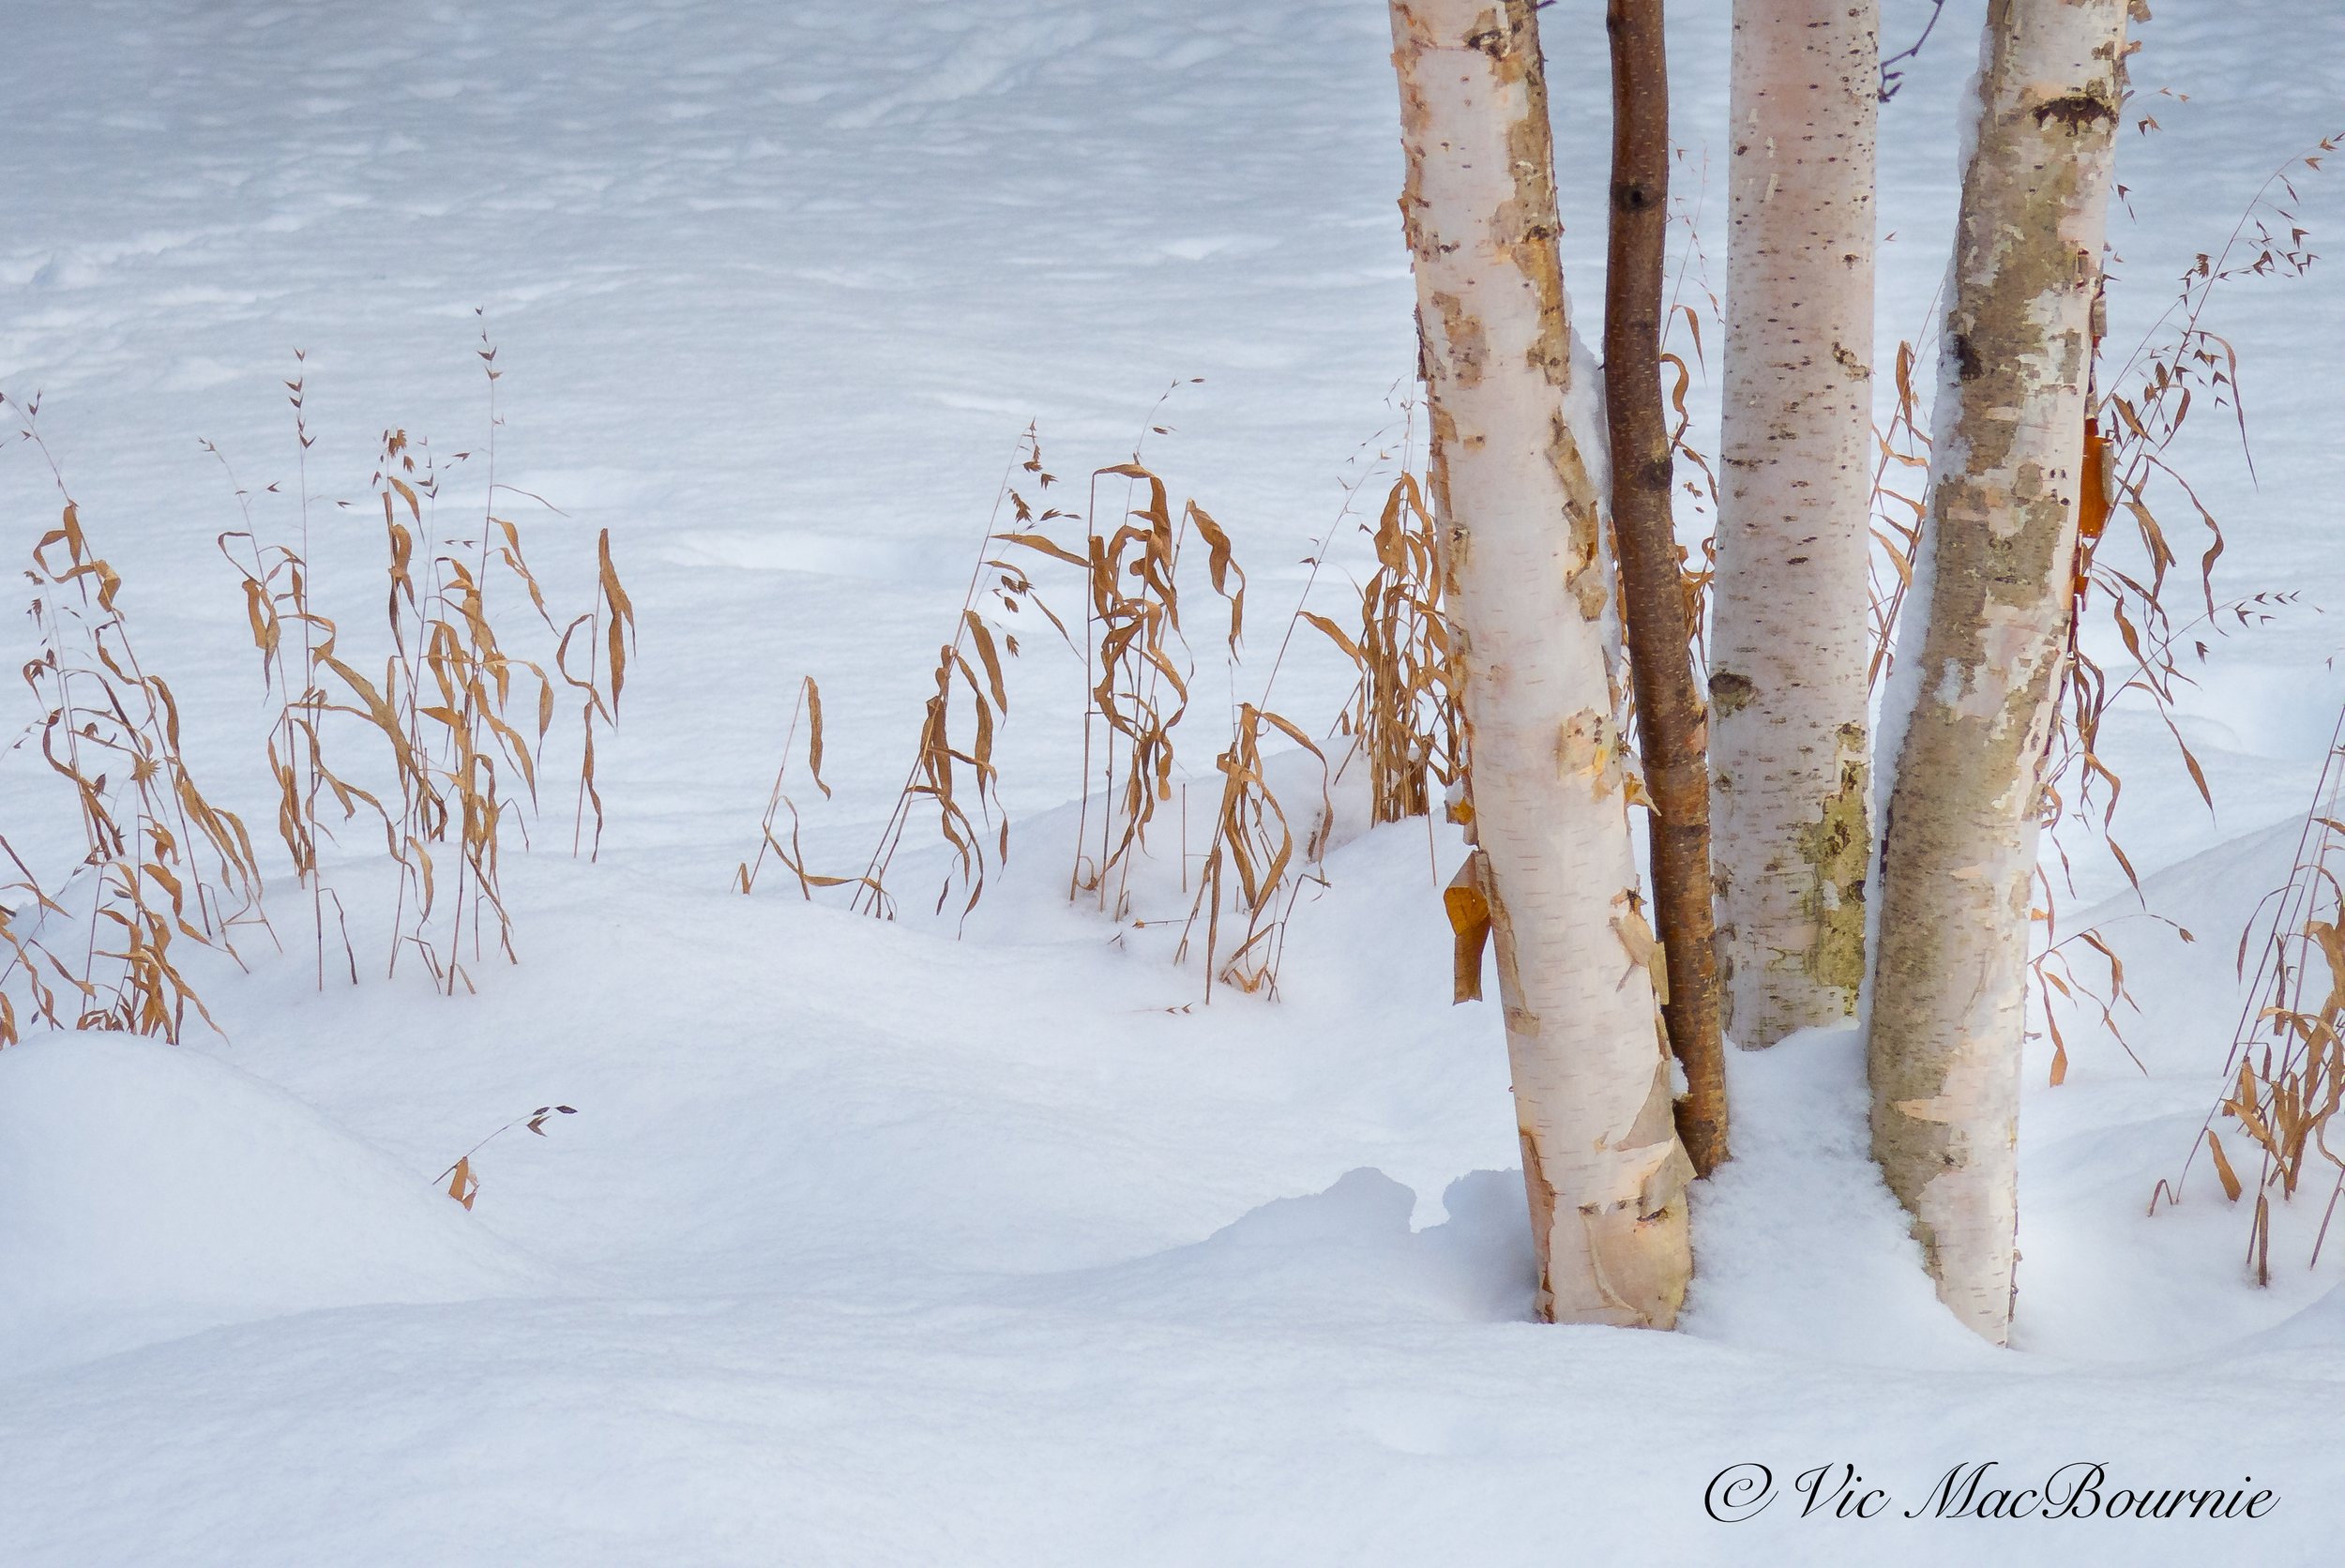 Even in winter birch trunks stand out in the landscape.